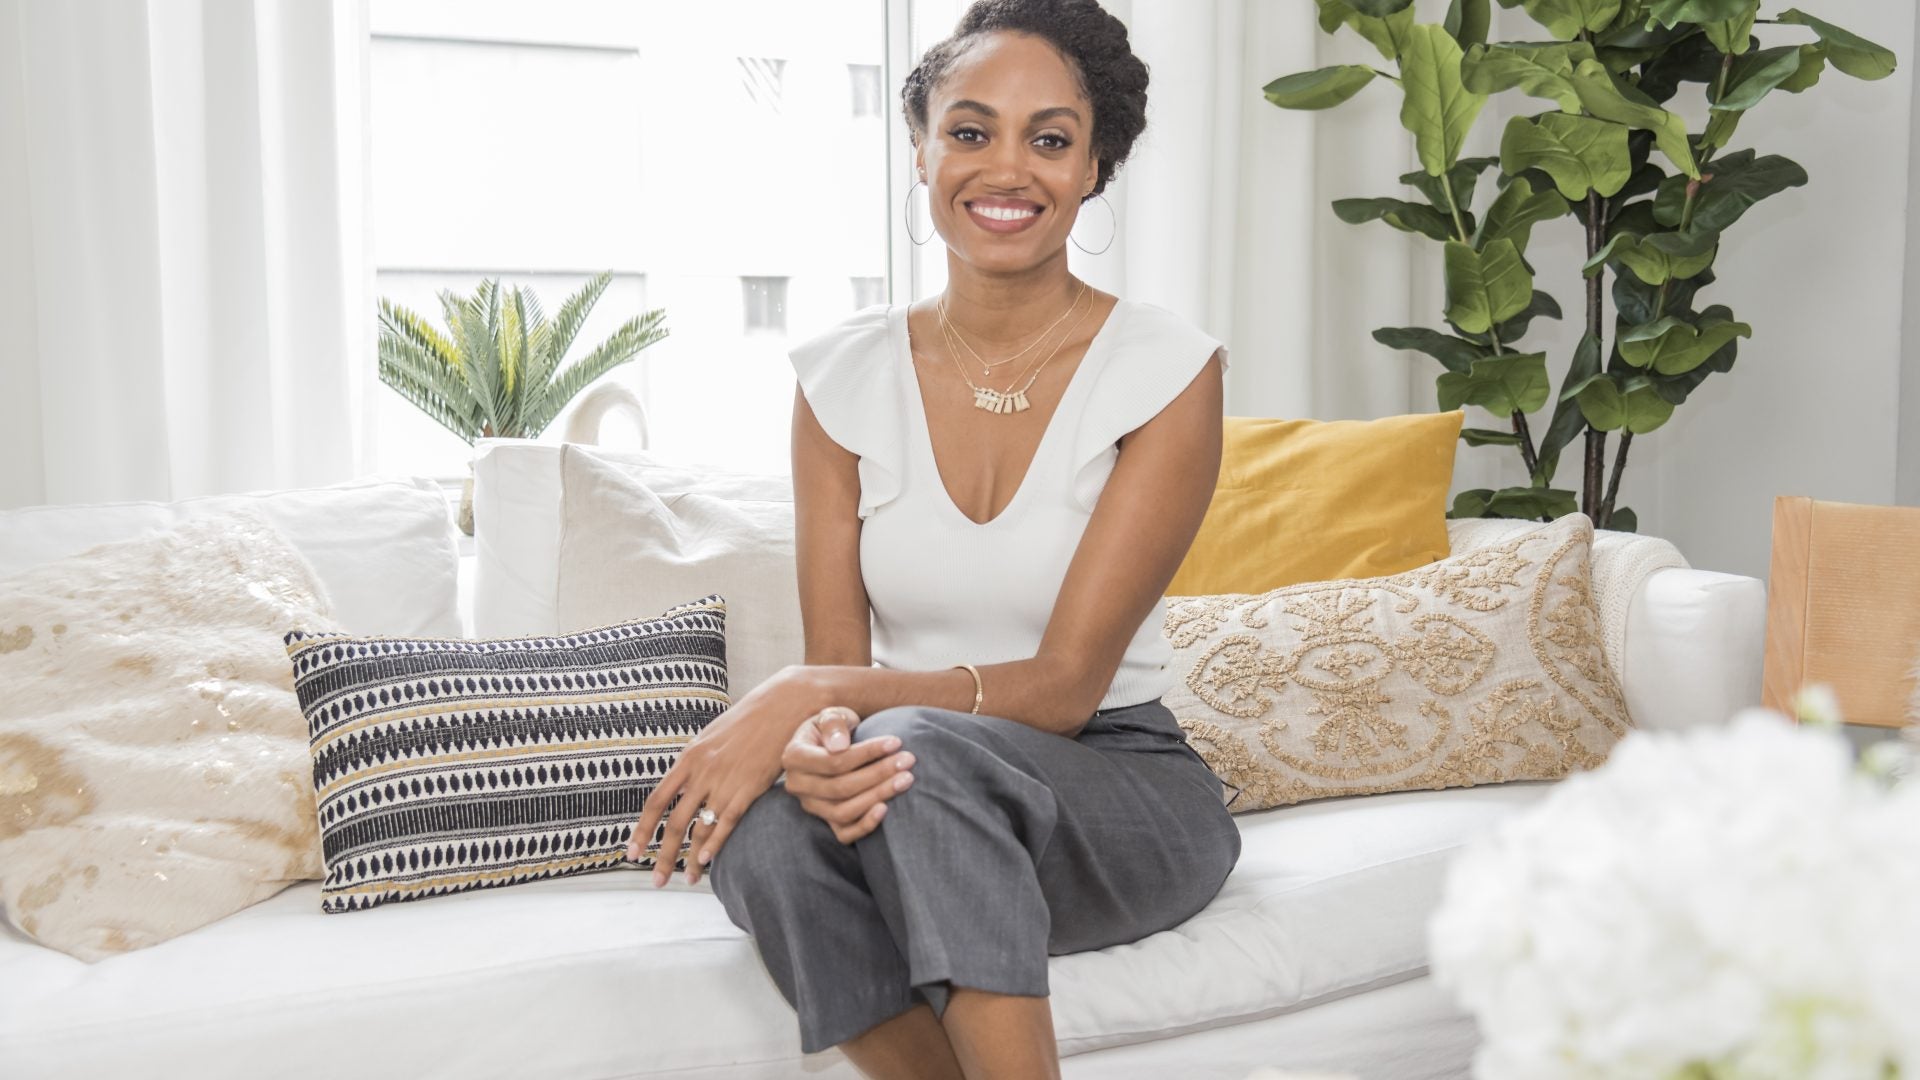 Three Keys To Succeeding in Business From a Black Woman in Tech Who Soared